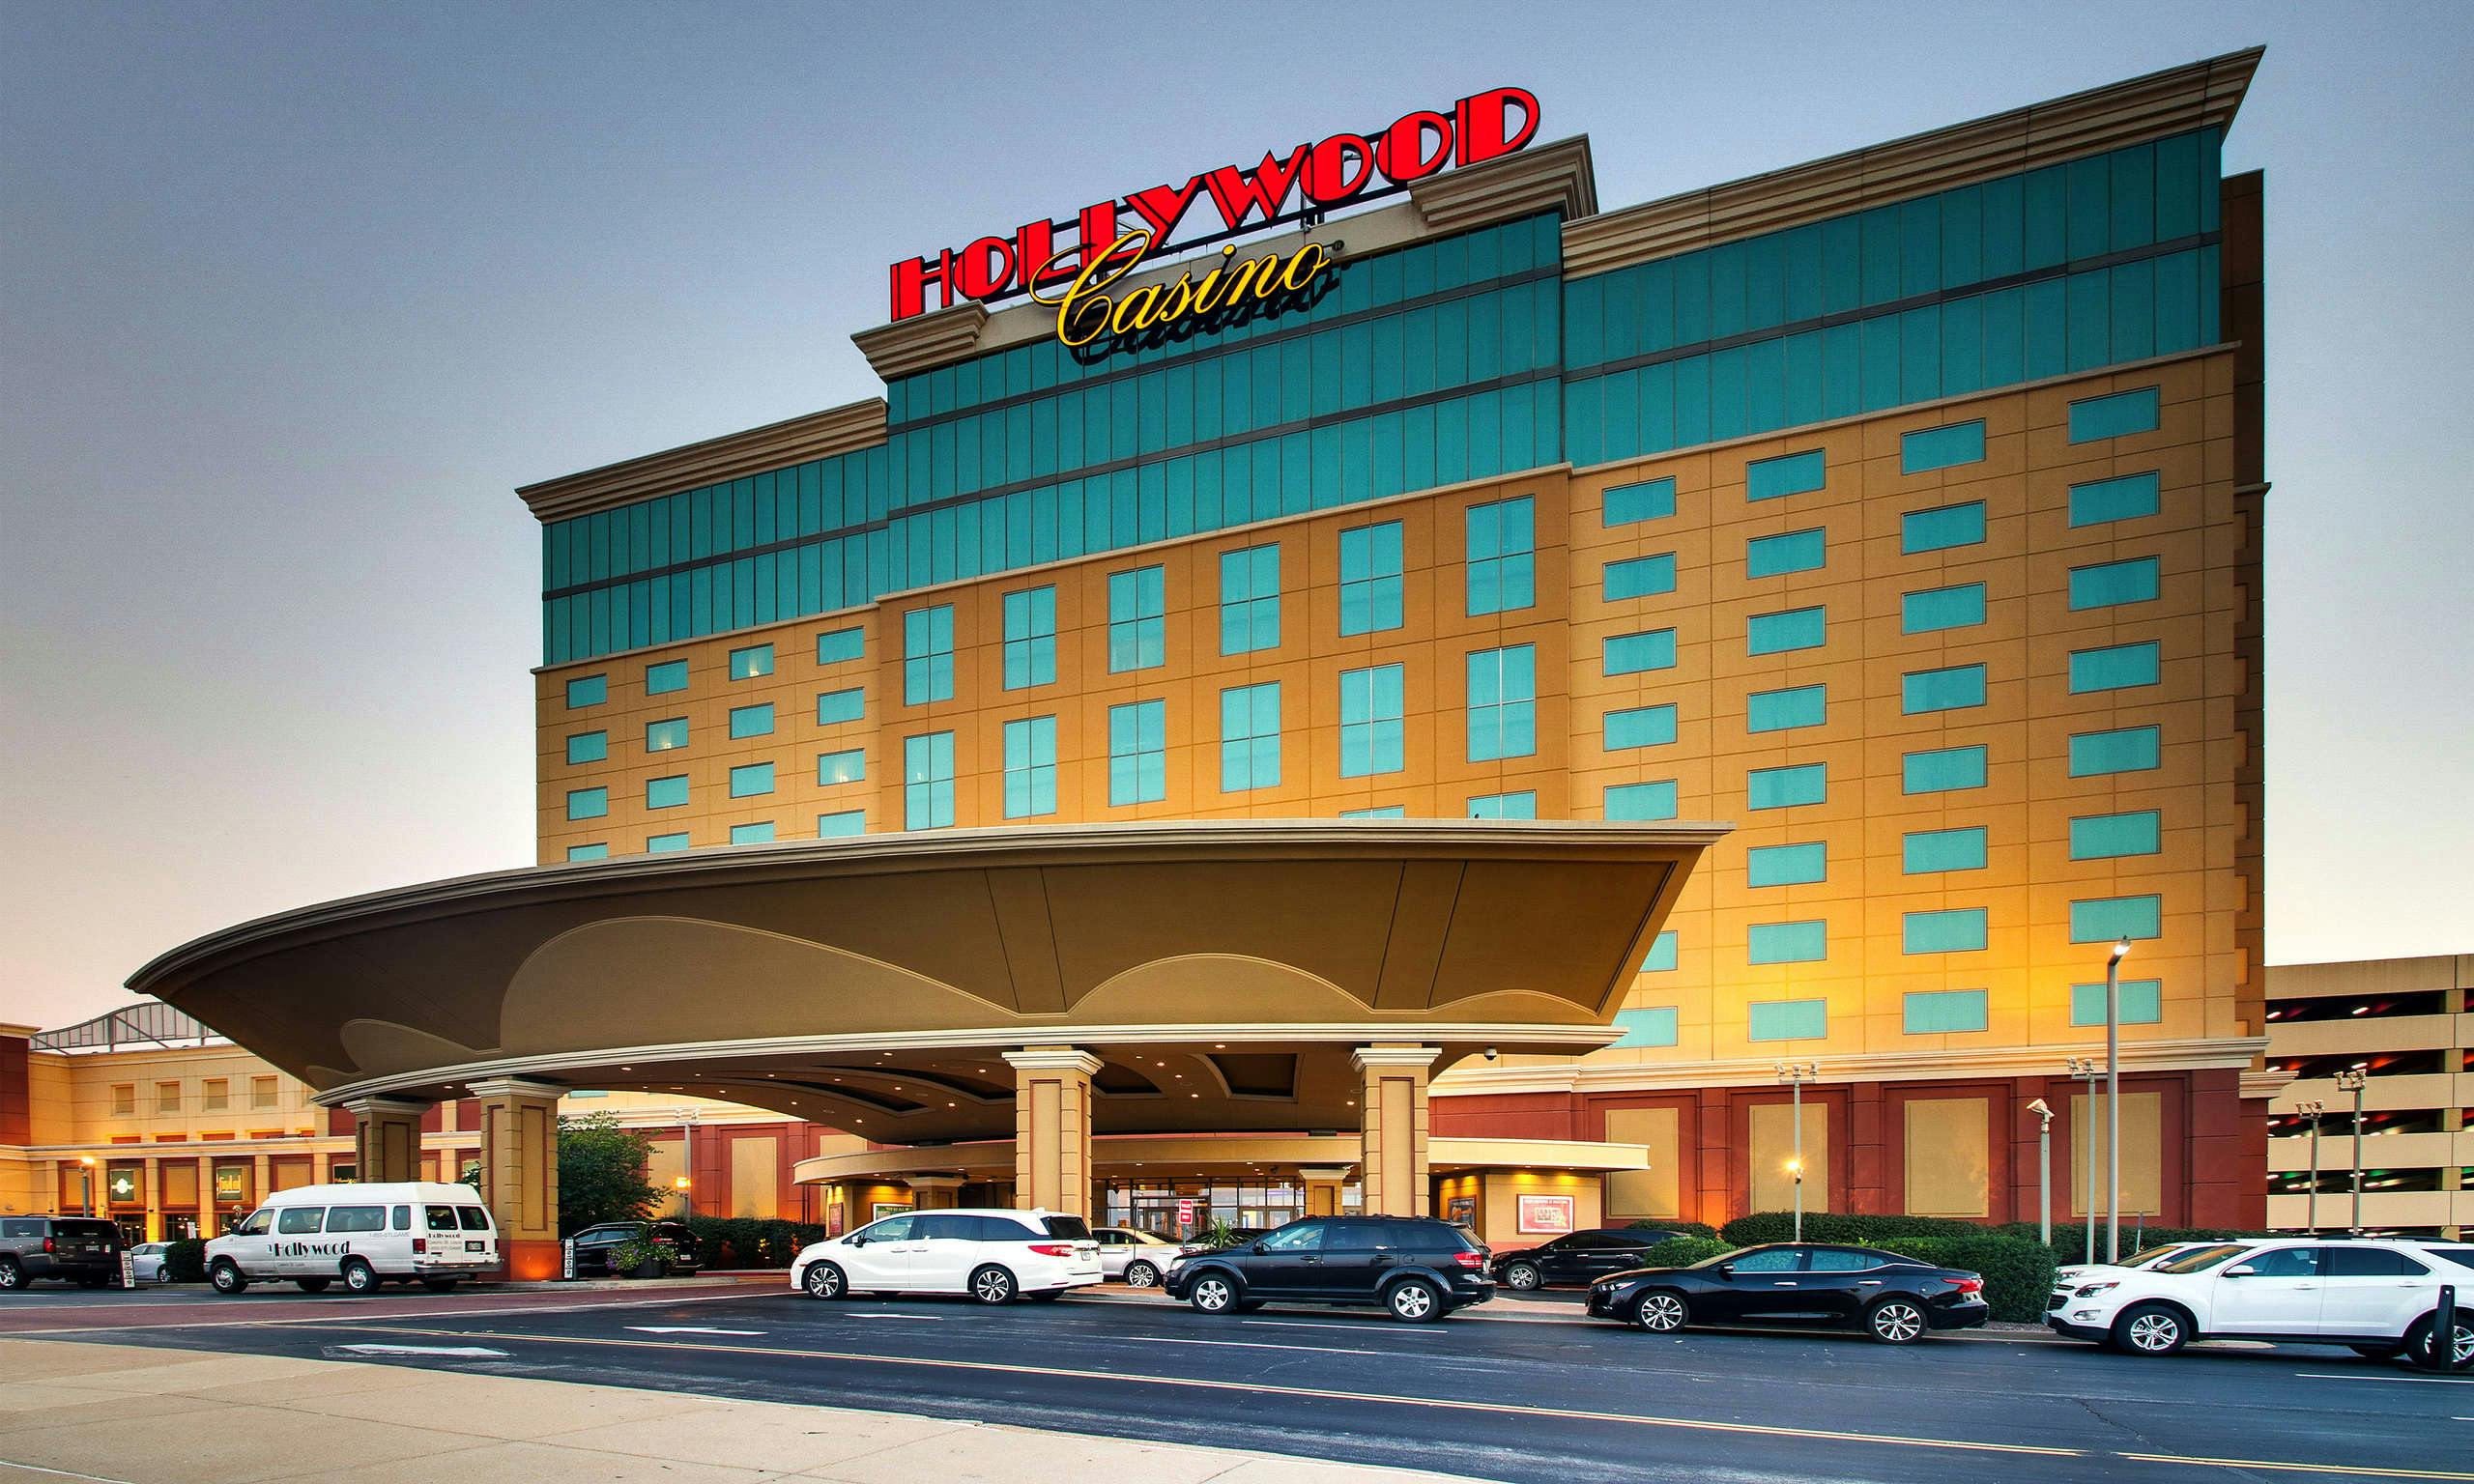 hollywood casino and hotel st louis